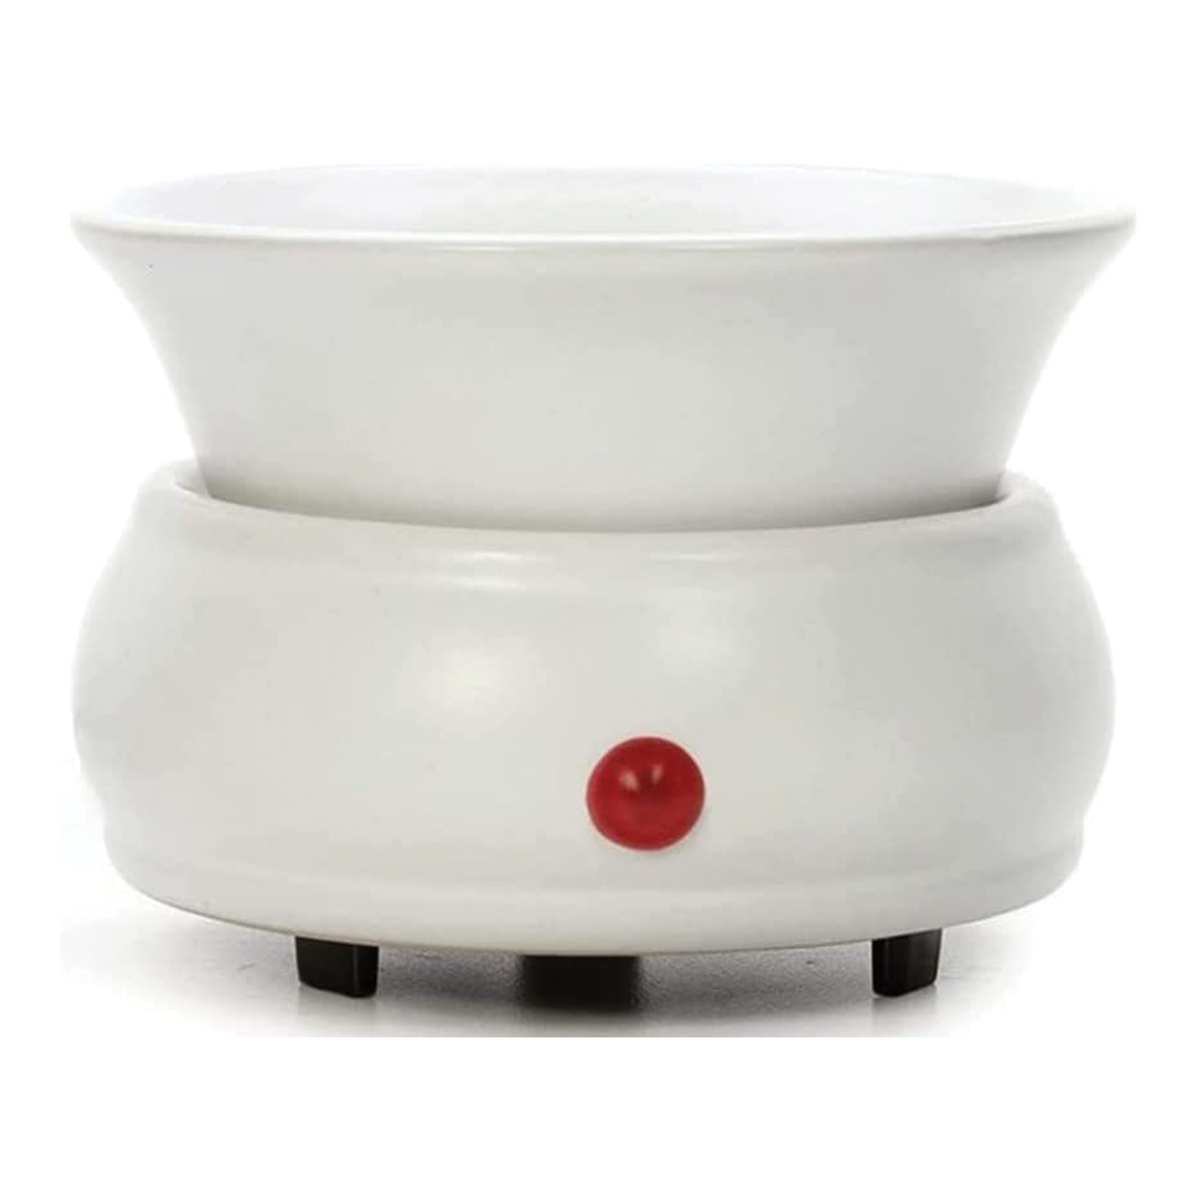 HOSLEY®  Ceramic Electric Candle Warmer, White  Color